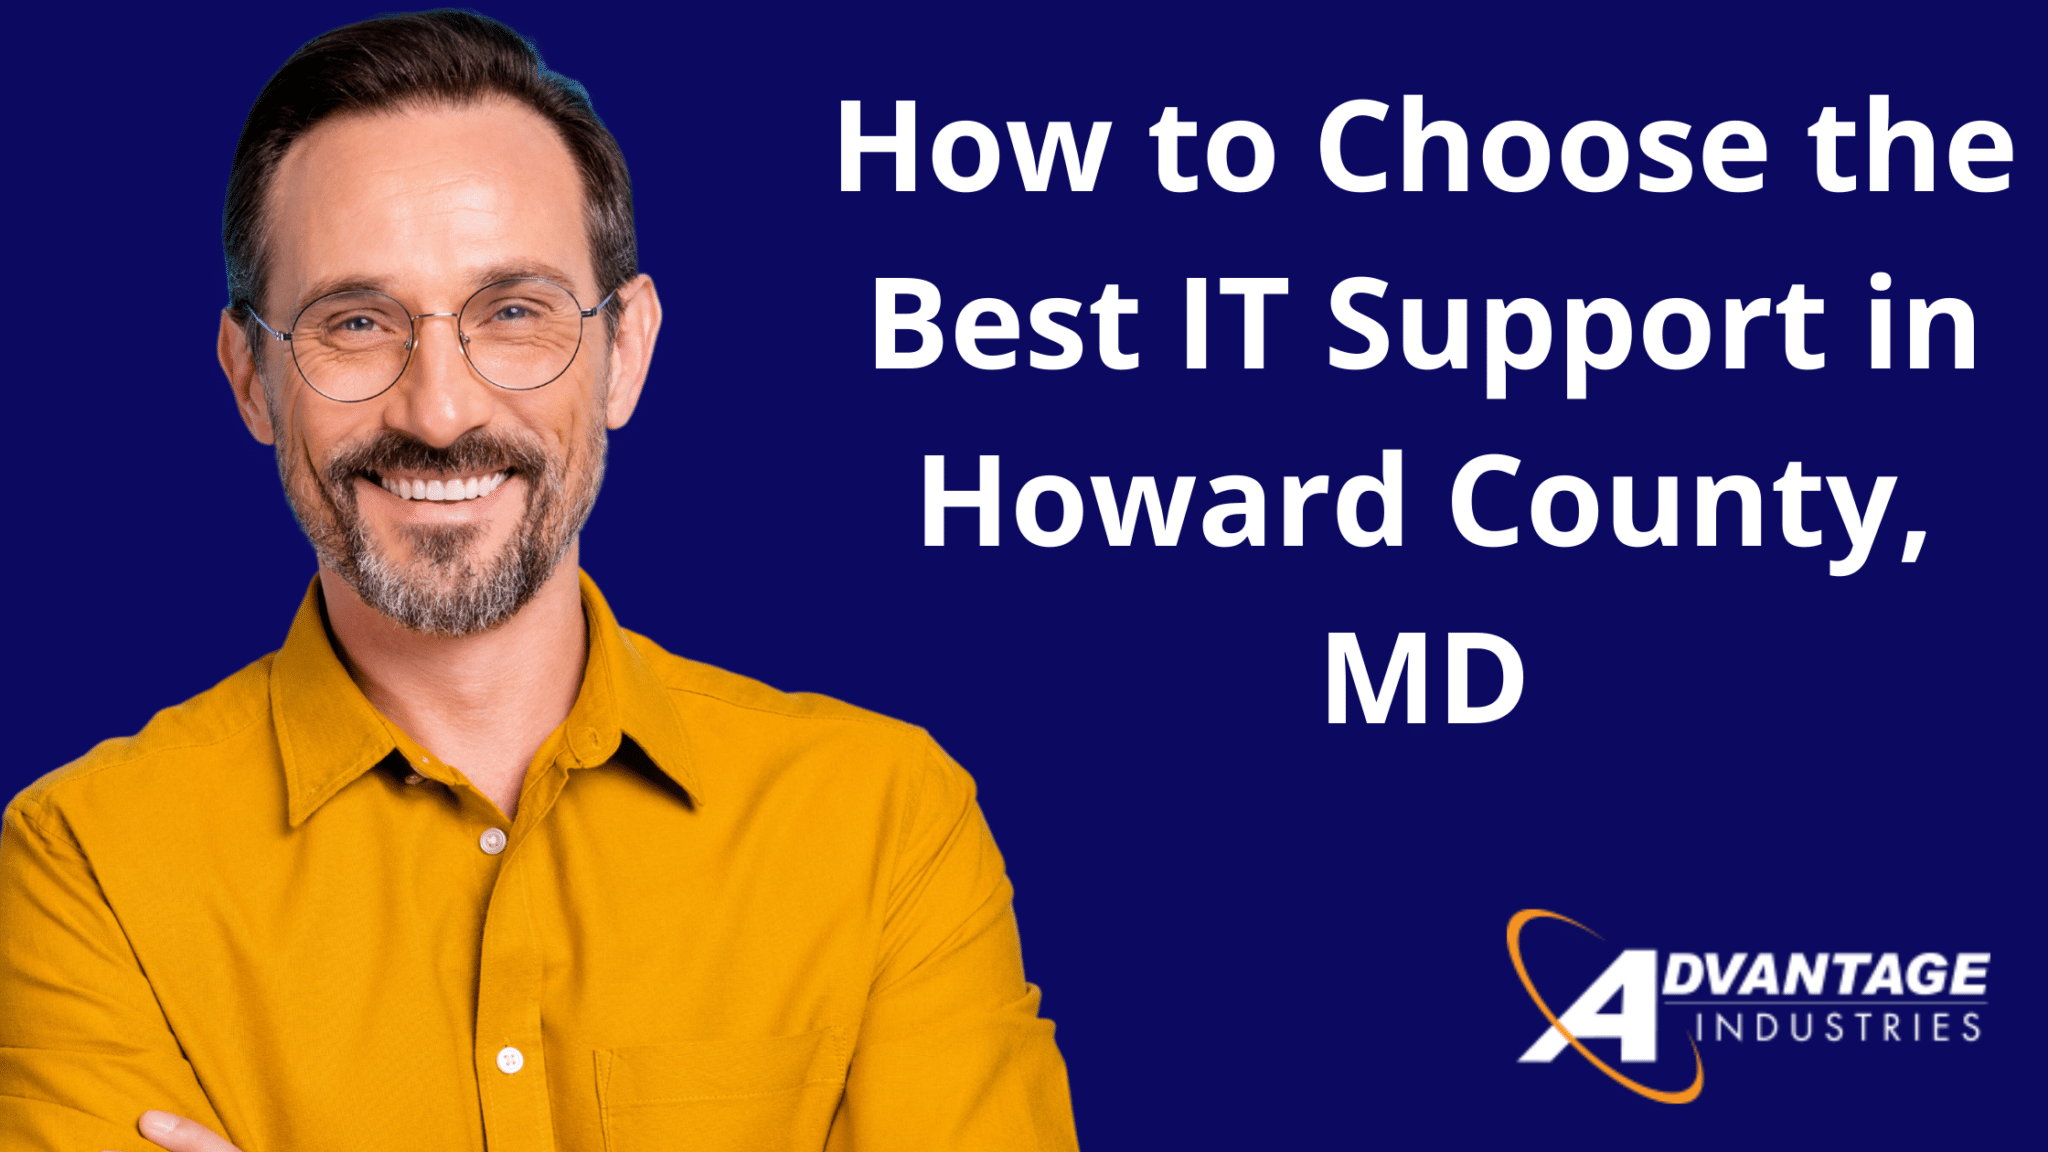 How to Choose the Best IT Support in Howard County, MD